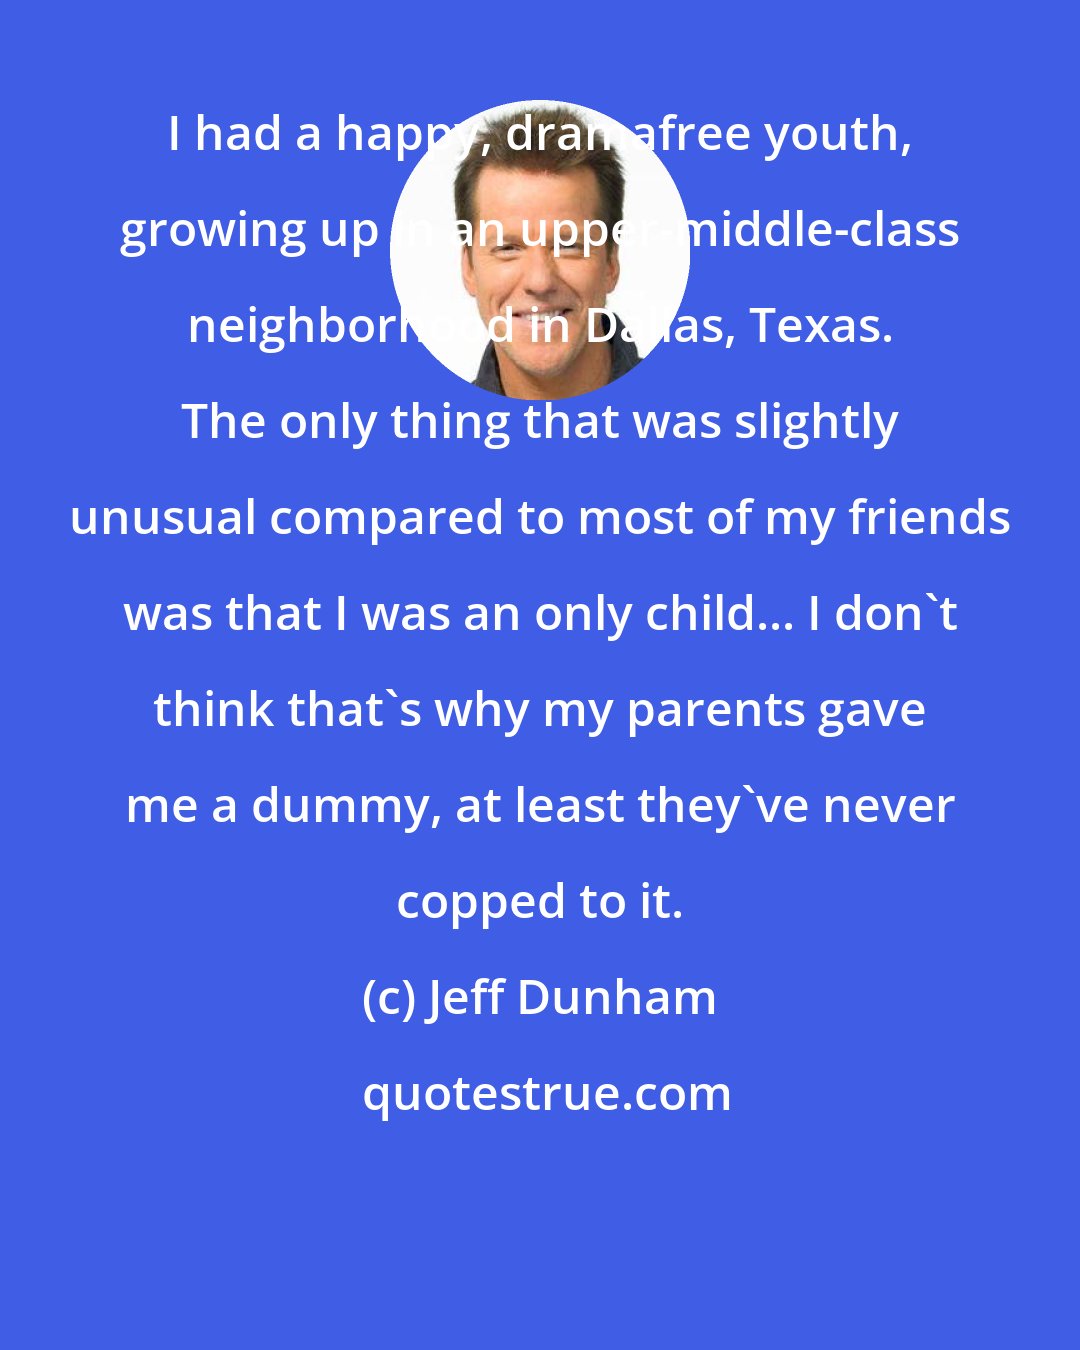 Jeff Dunham: I had a happy, dramafree youth, growing up in an upper-middle-class neighborhood in Dallas, Texas. The only thing that was slightly unusual compared to most of my friends was that I was an only child... I don't think that's why my parents gave me a dummy, at least they've never copped to it.